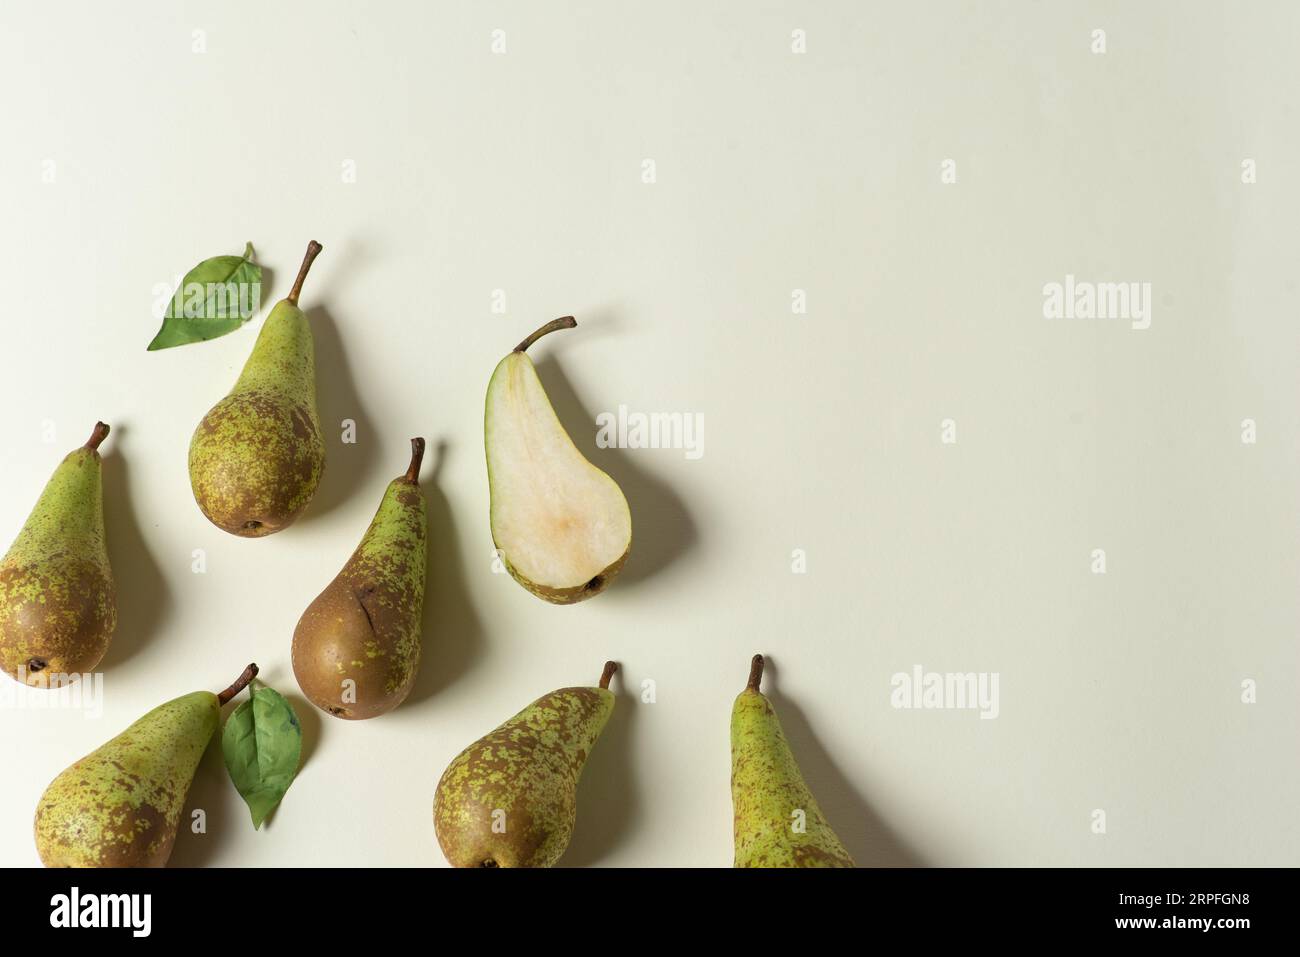 Few large, green, organic pears on a white background Stock Photo